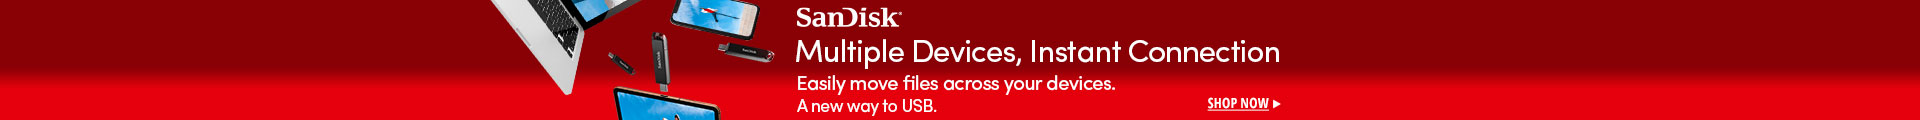 SanDisk multiple devices, instant connection